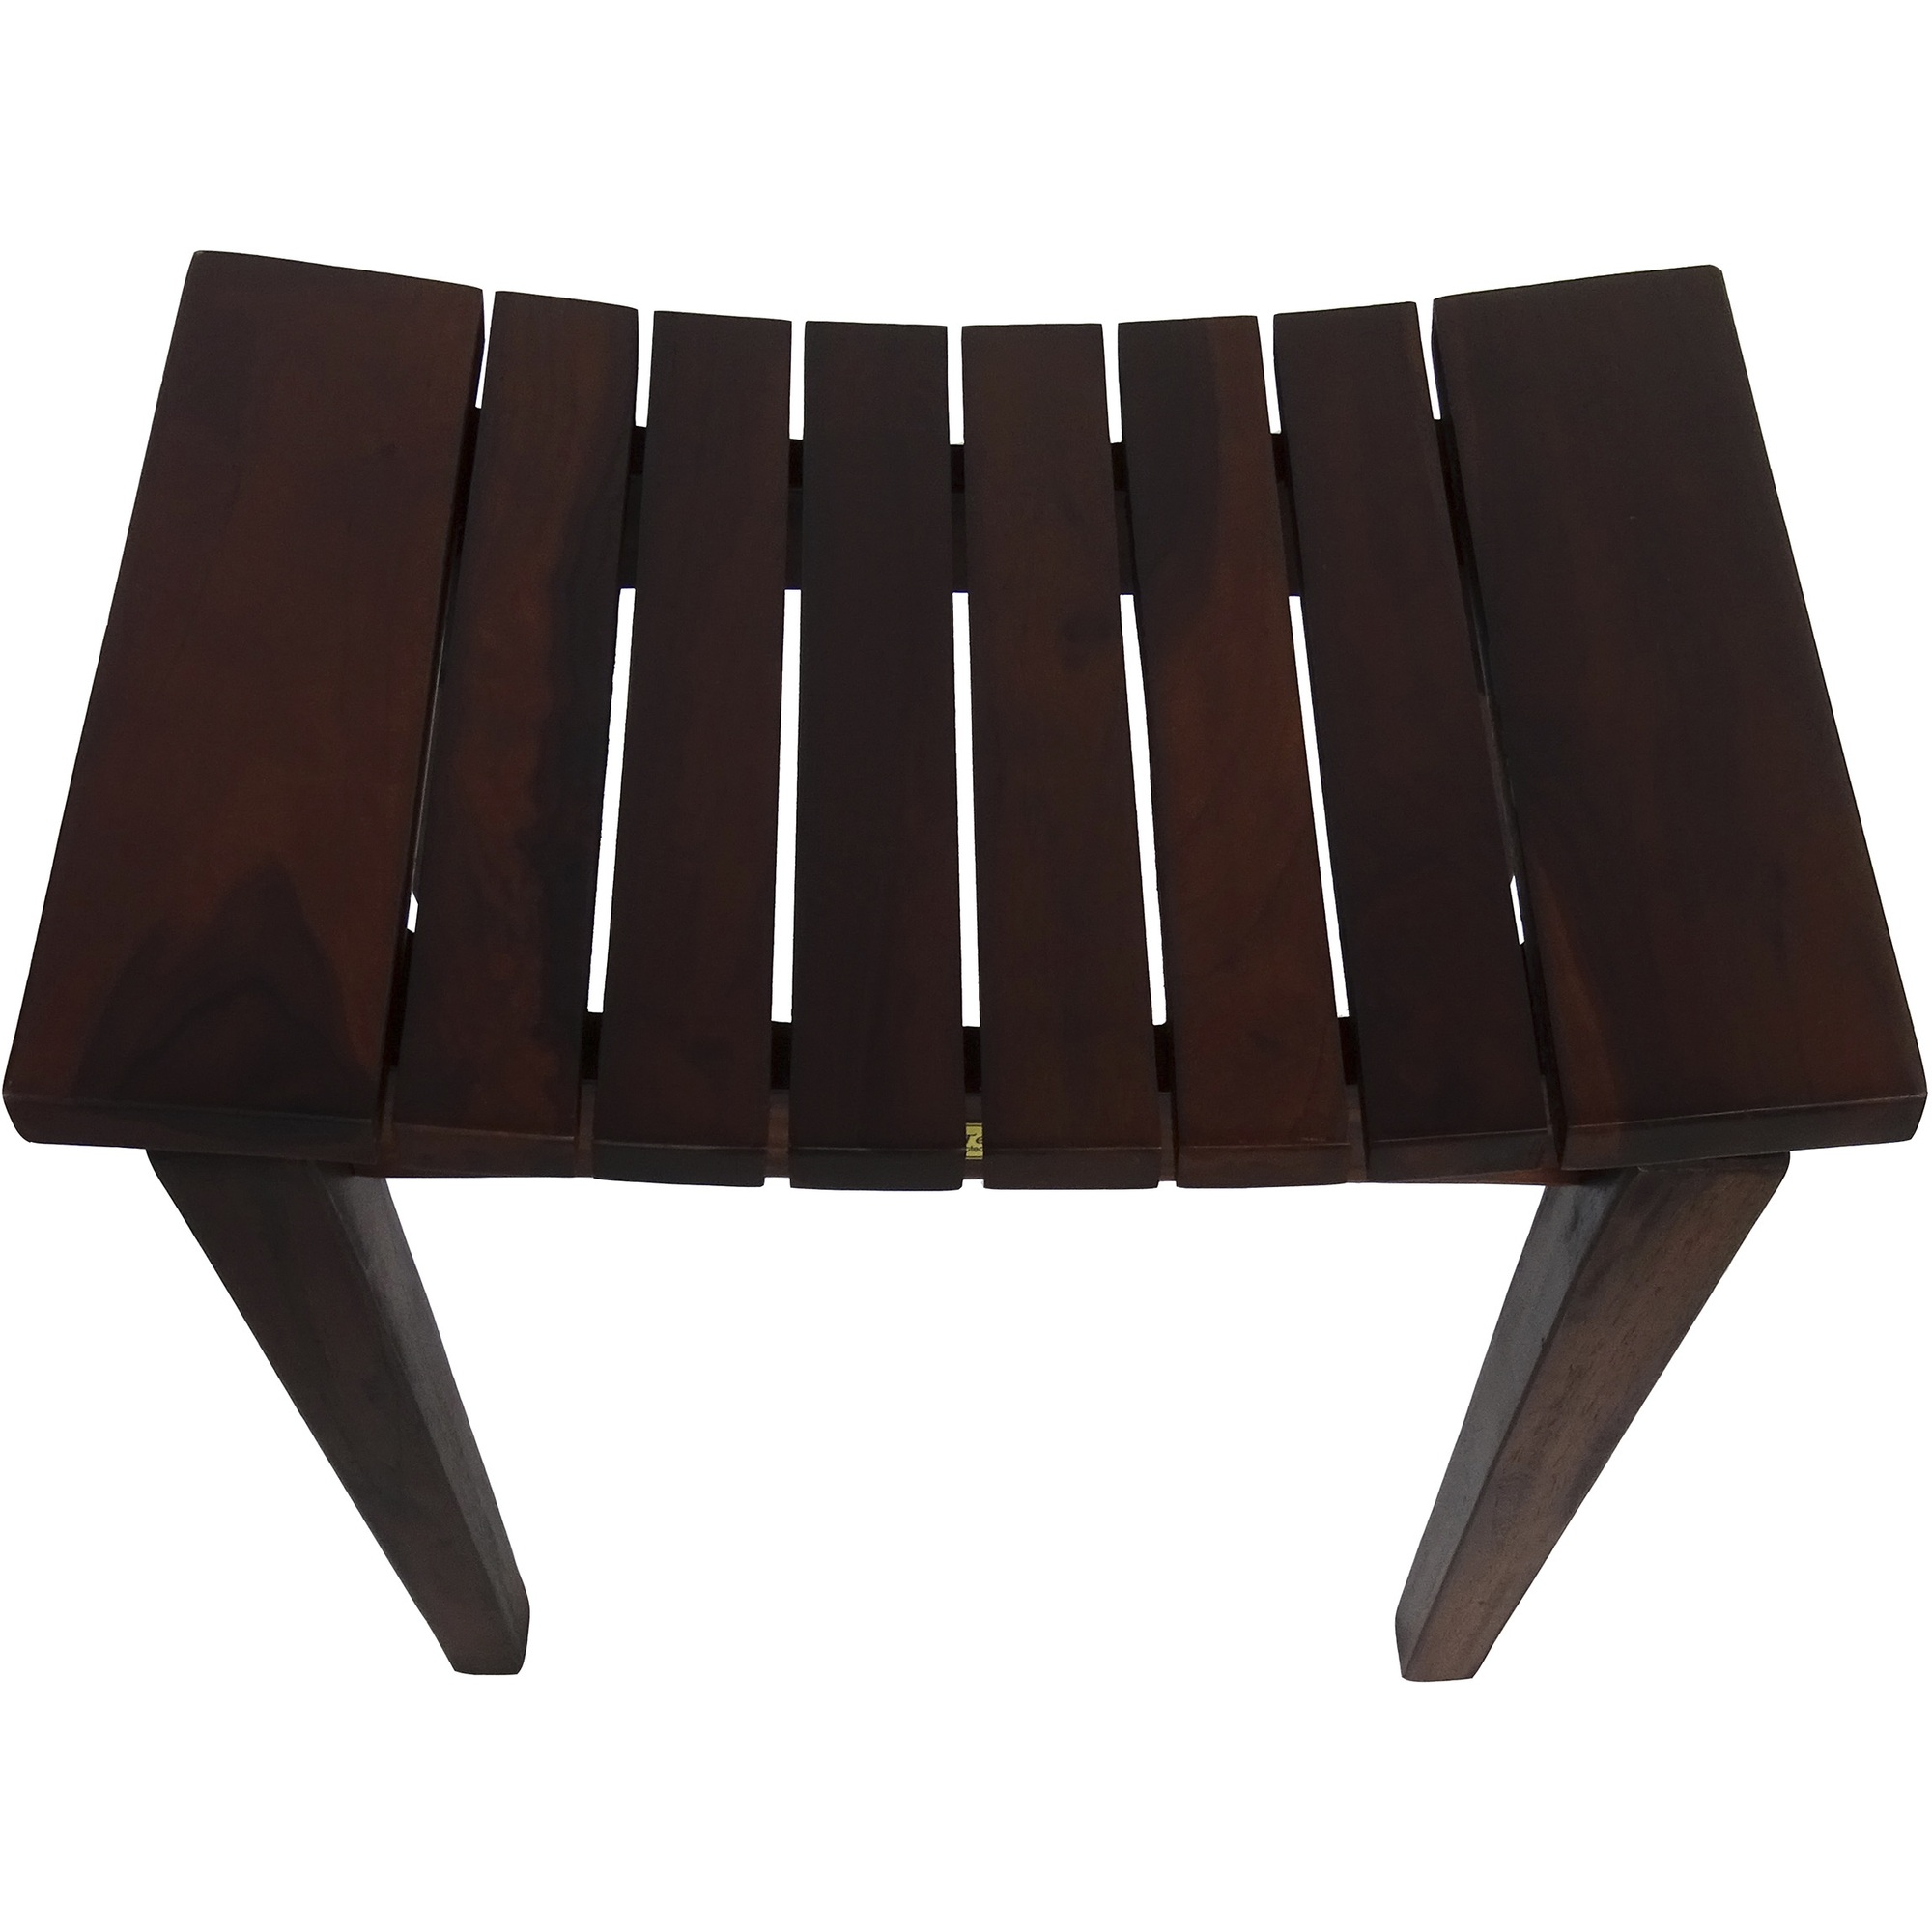 Contemporary Flared Teak Shower Stool or Bench in Brown Finish